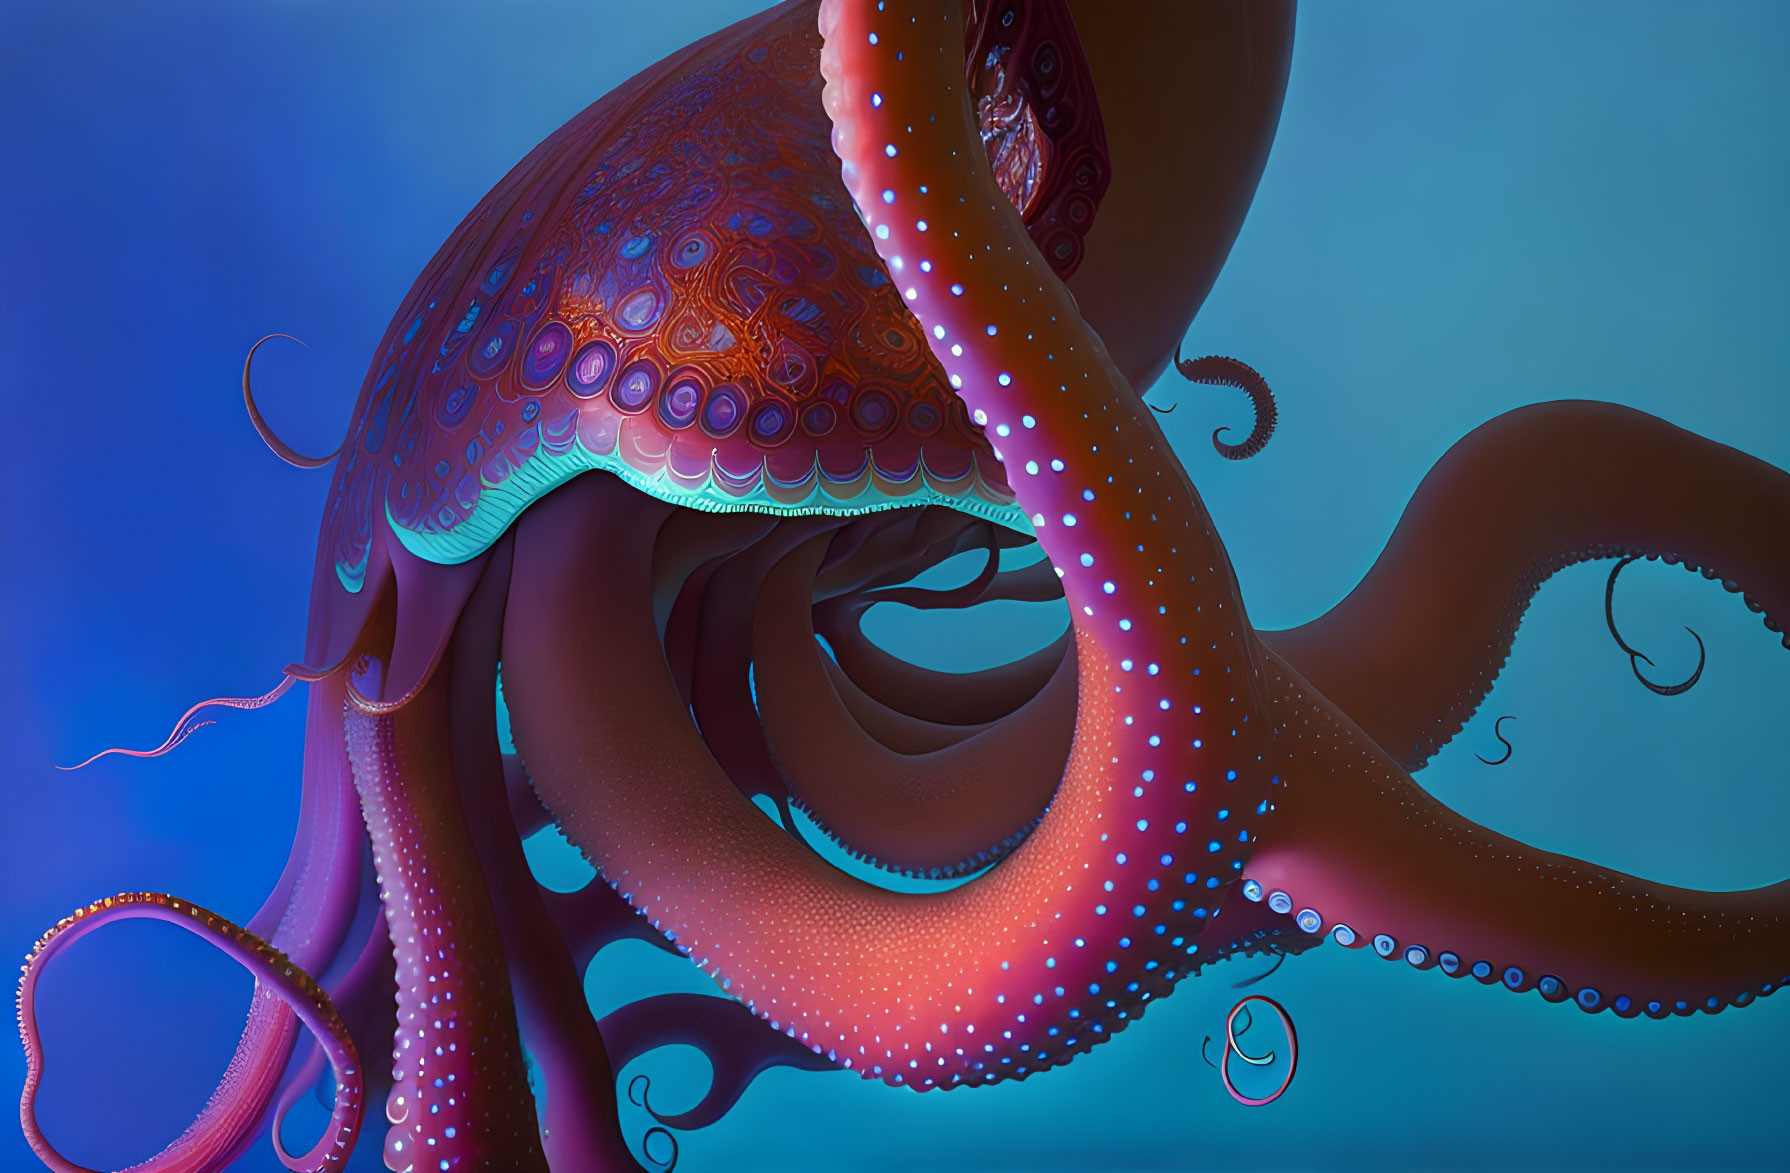 Detailed digital octopus illustration with bioluminescent suckers on blue gradient background